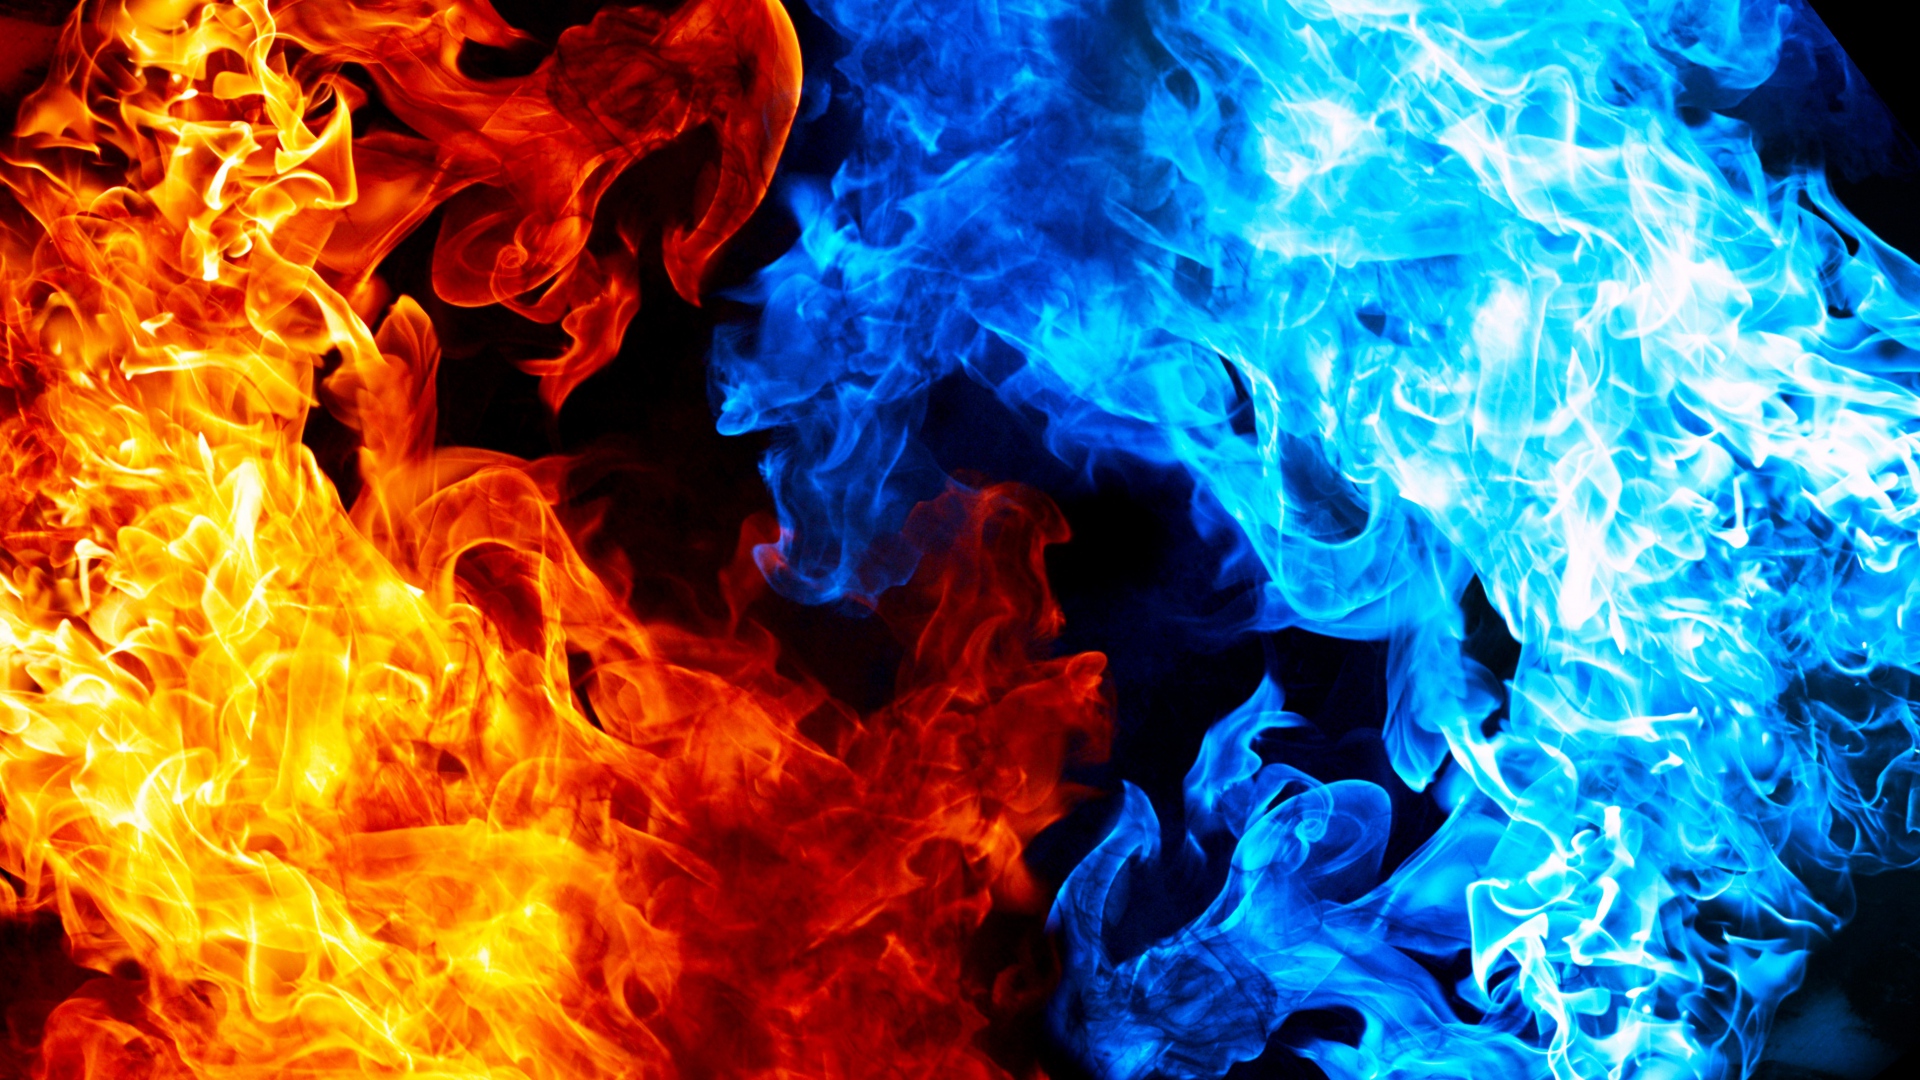 Fire Flame Wallpaper PPT Backgrounds